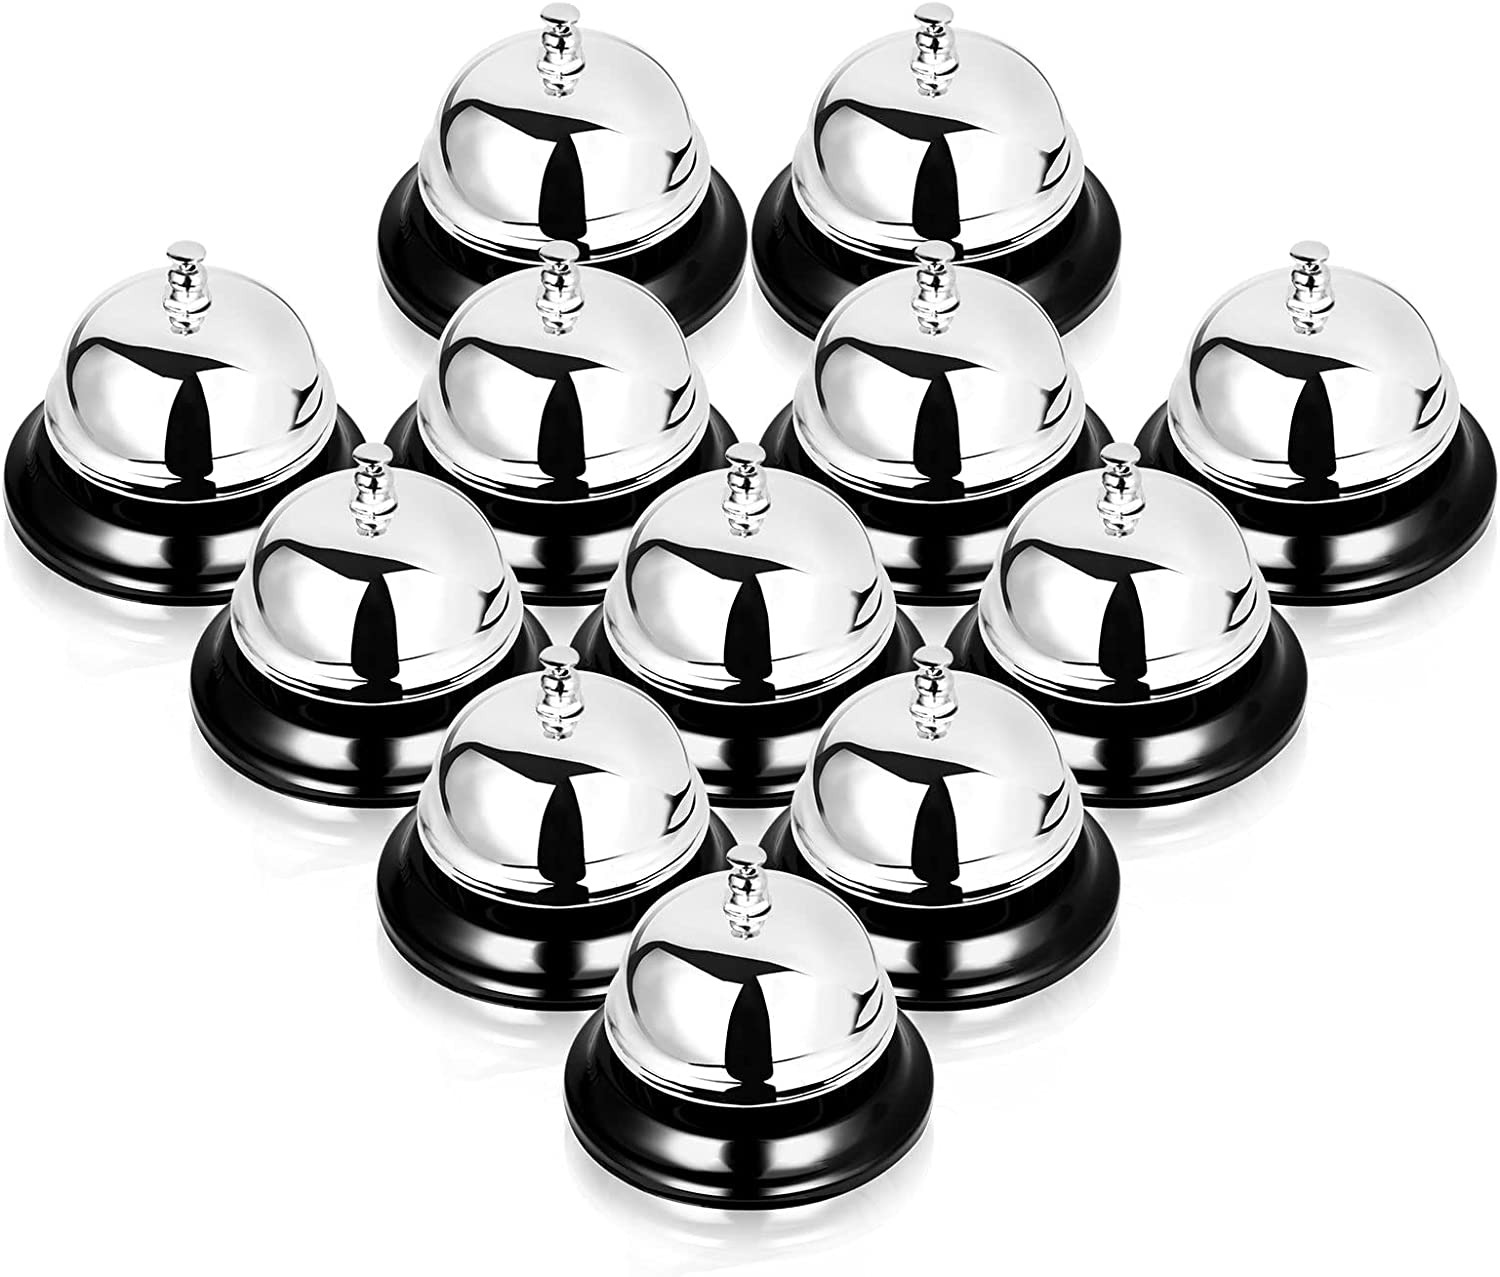 12PCS Call Bell Service Bell for Desk, 3.35 Inch Diameter, Call Bells with Metal